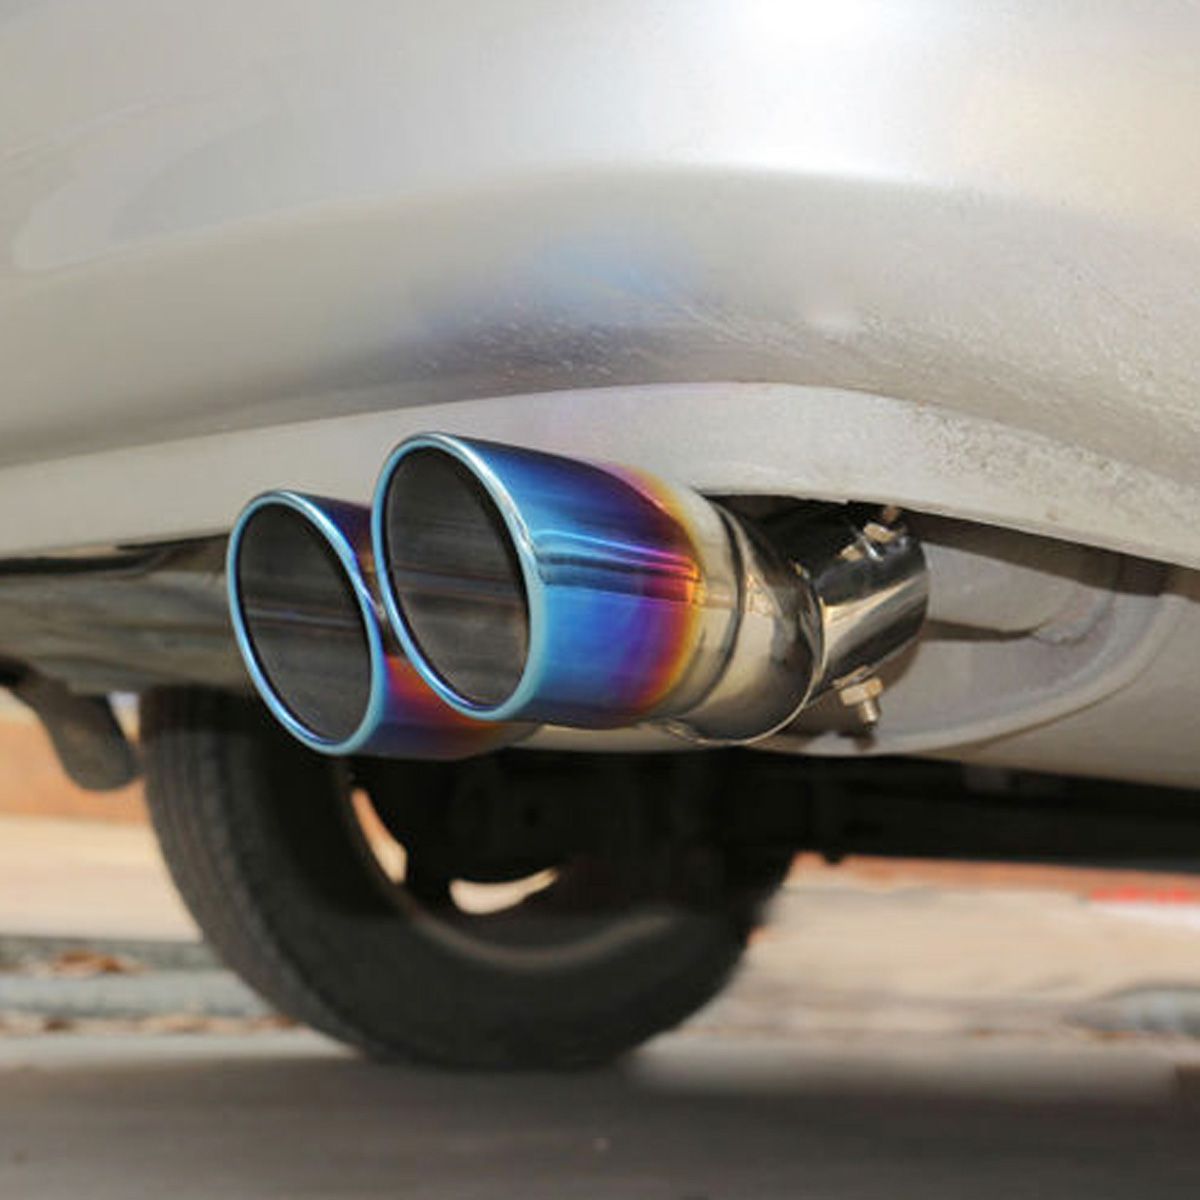 25-Inch-Blue-Car-Burnt-Dual-Exhaust-Pipes-Polished-Stainless-Steel-1208641